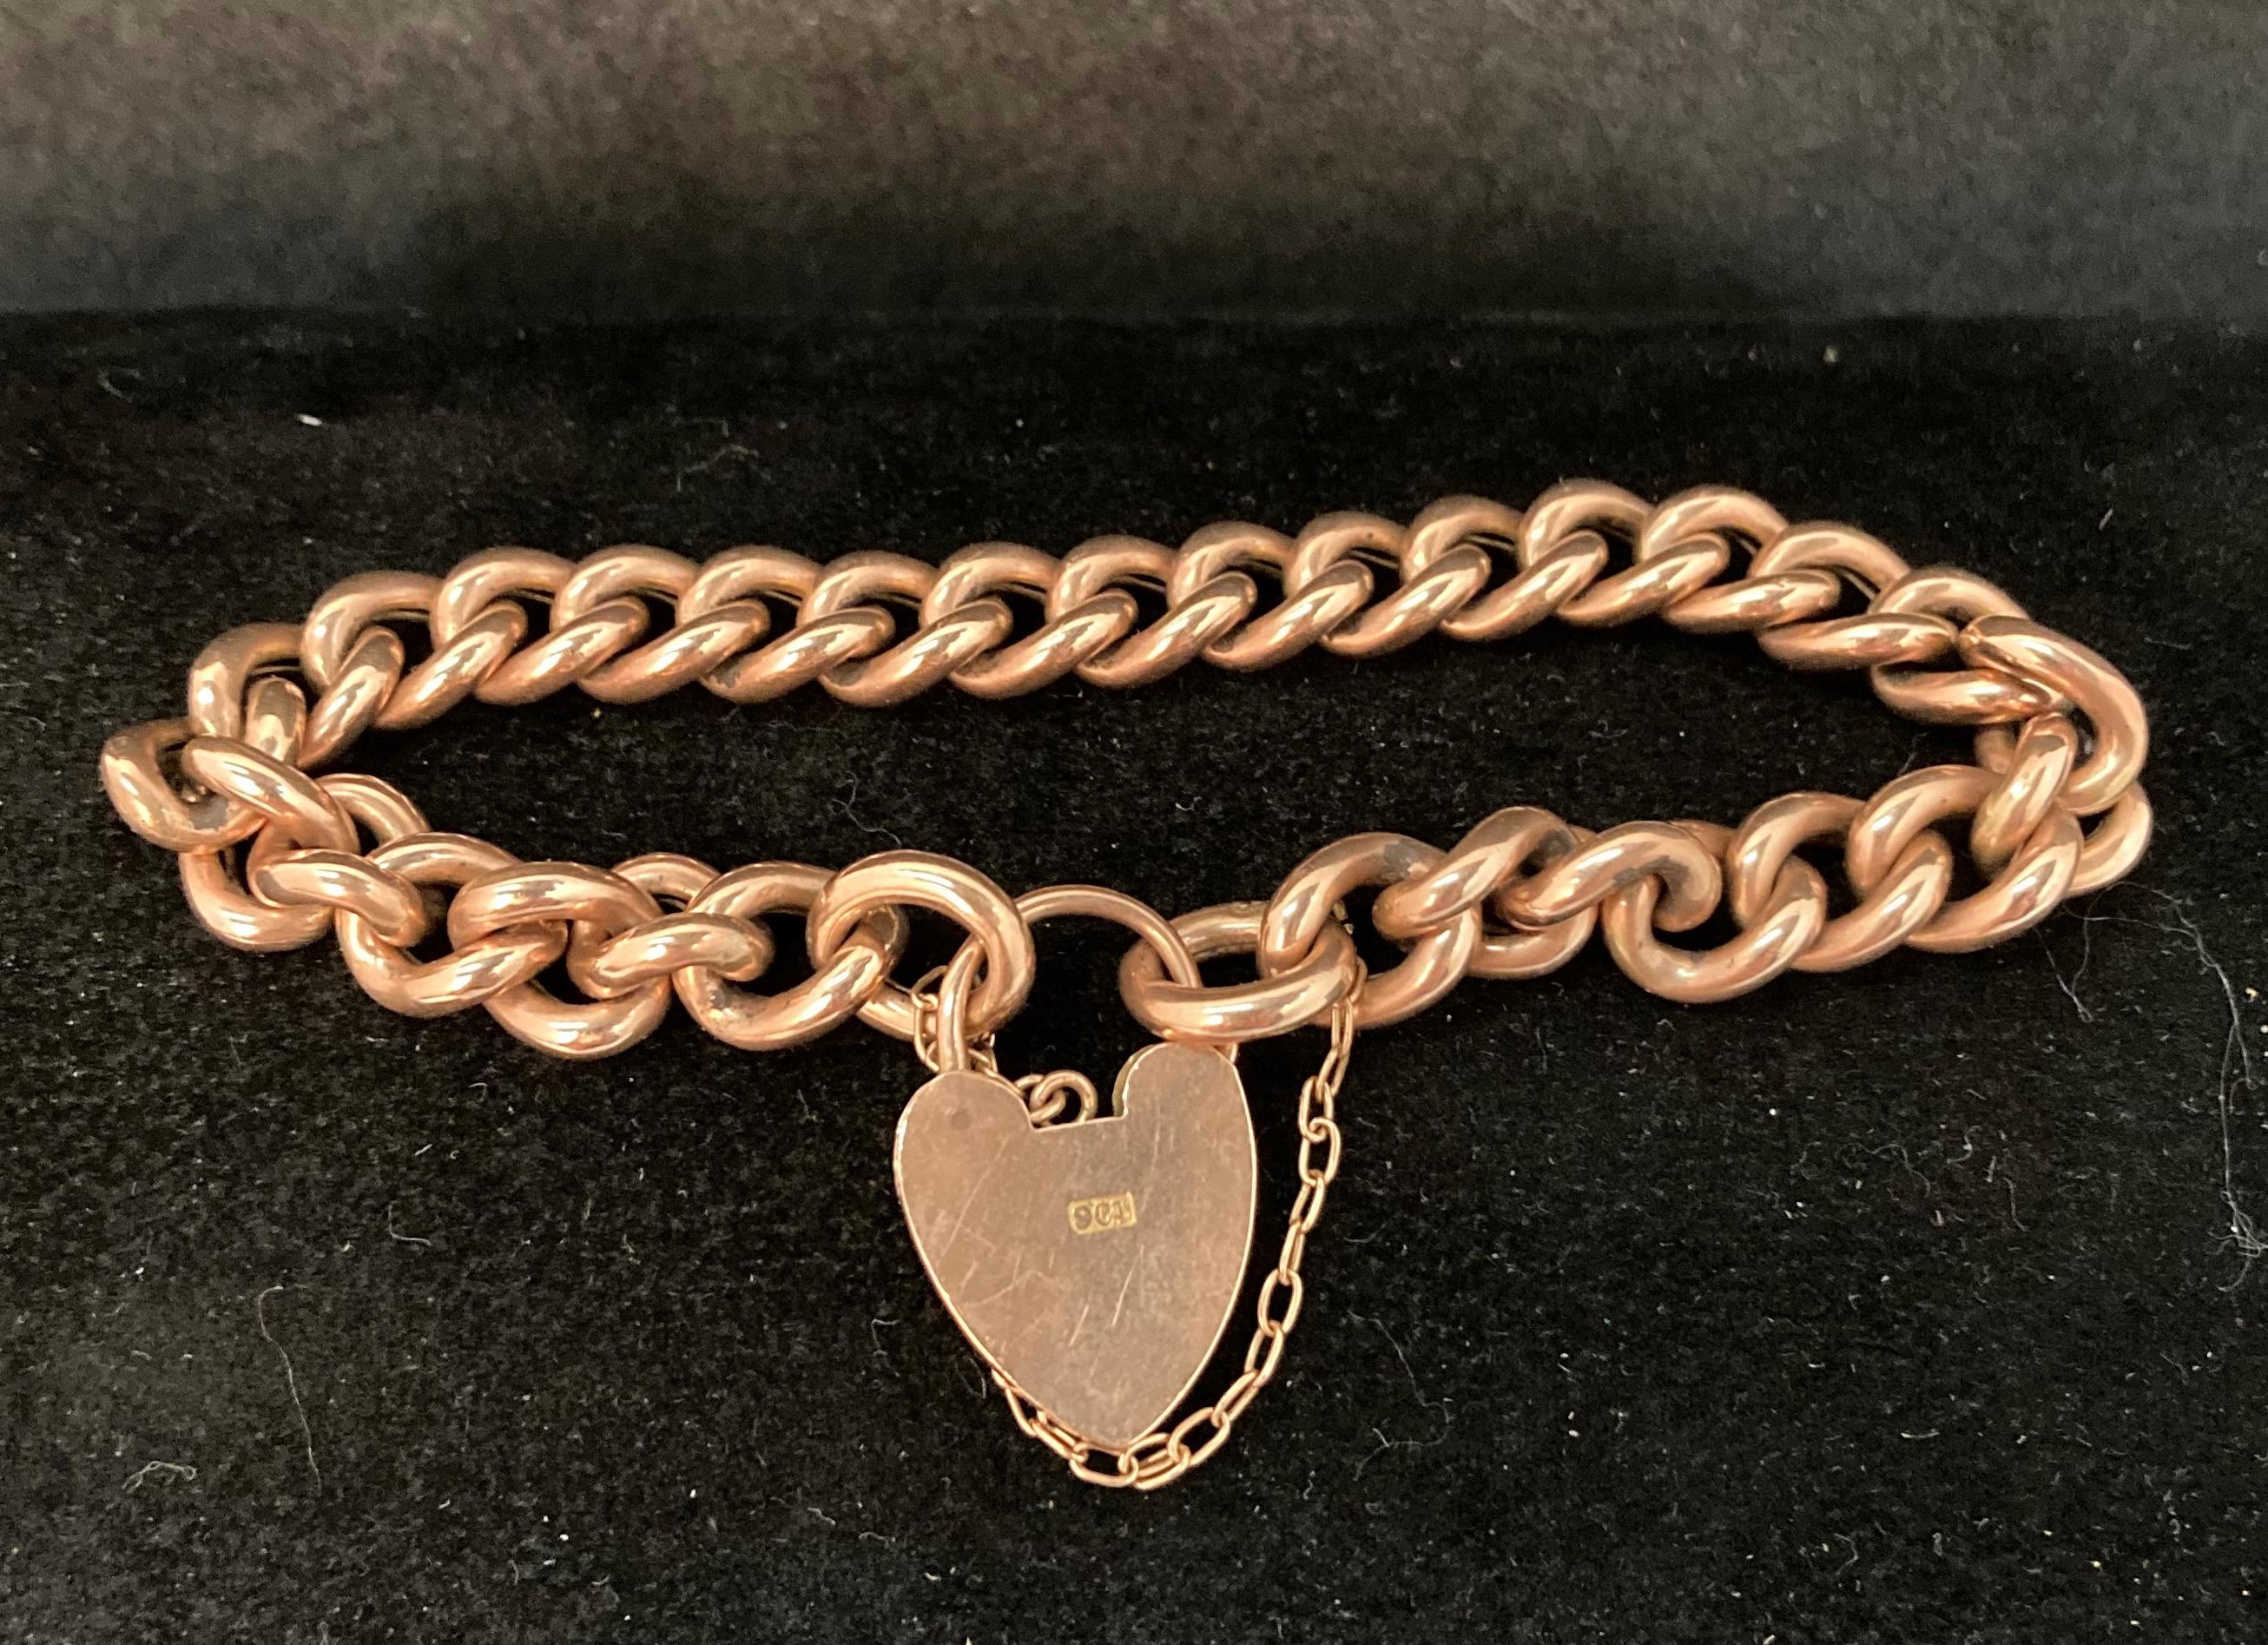 9ct gold hollow-link bracelet with heart-shaped padlock clasp. Weight - 17. - Image 2 of 3